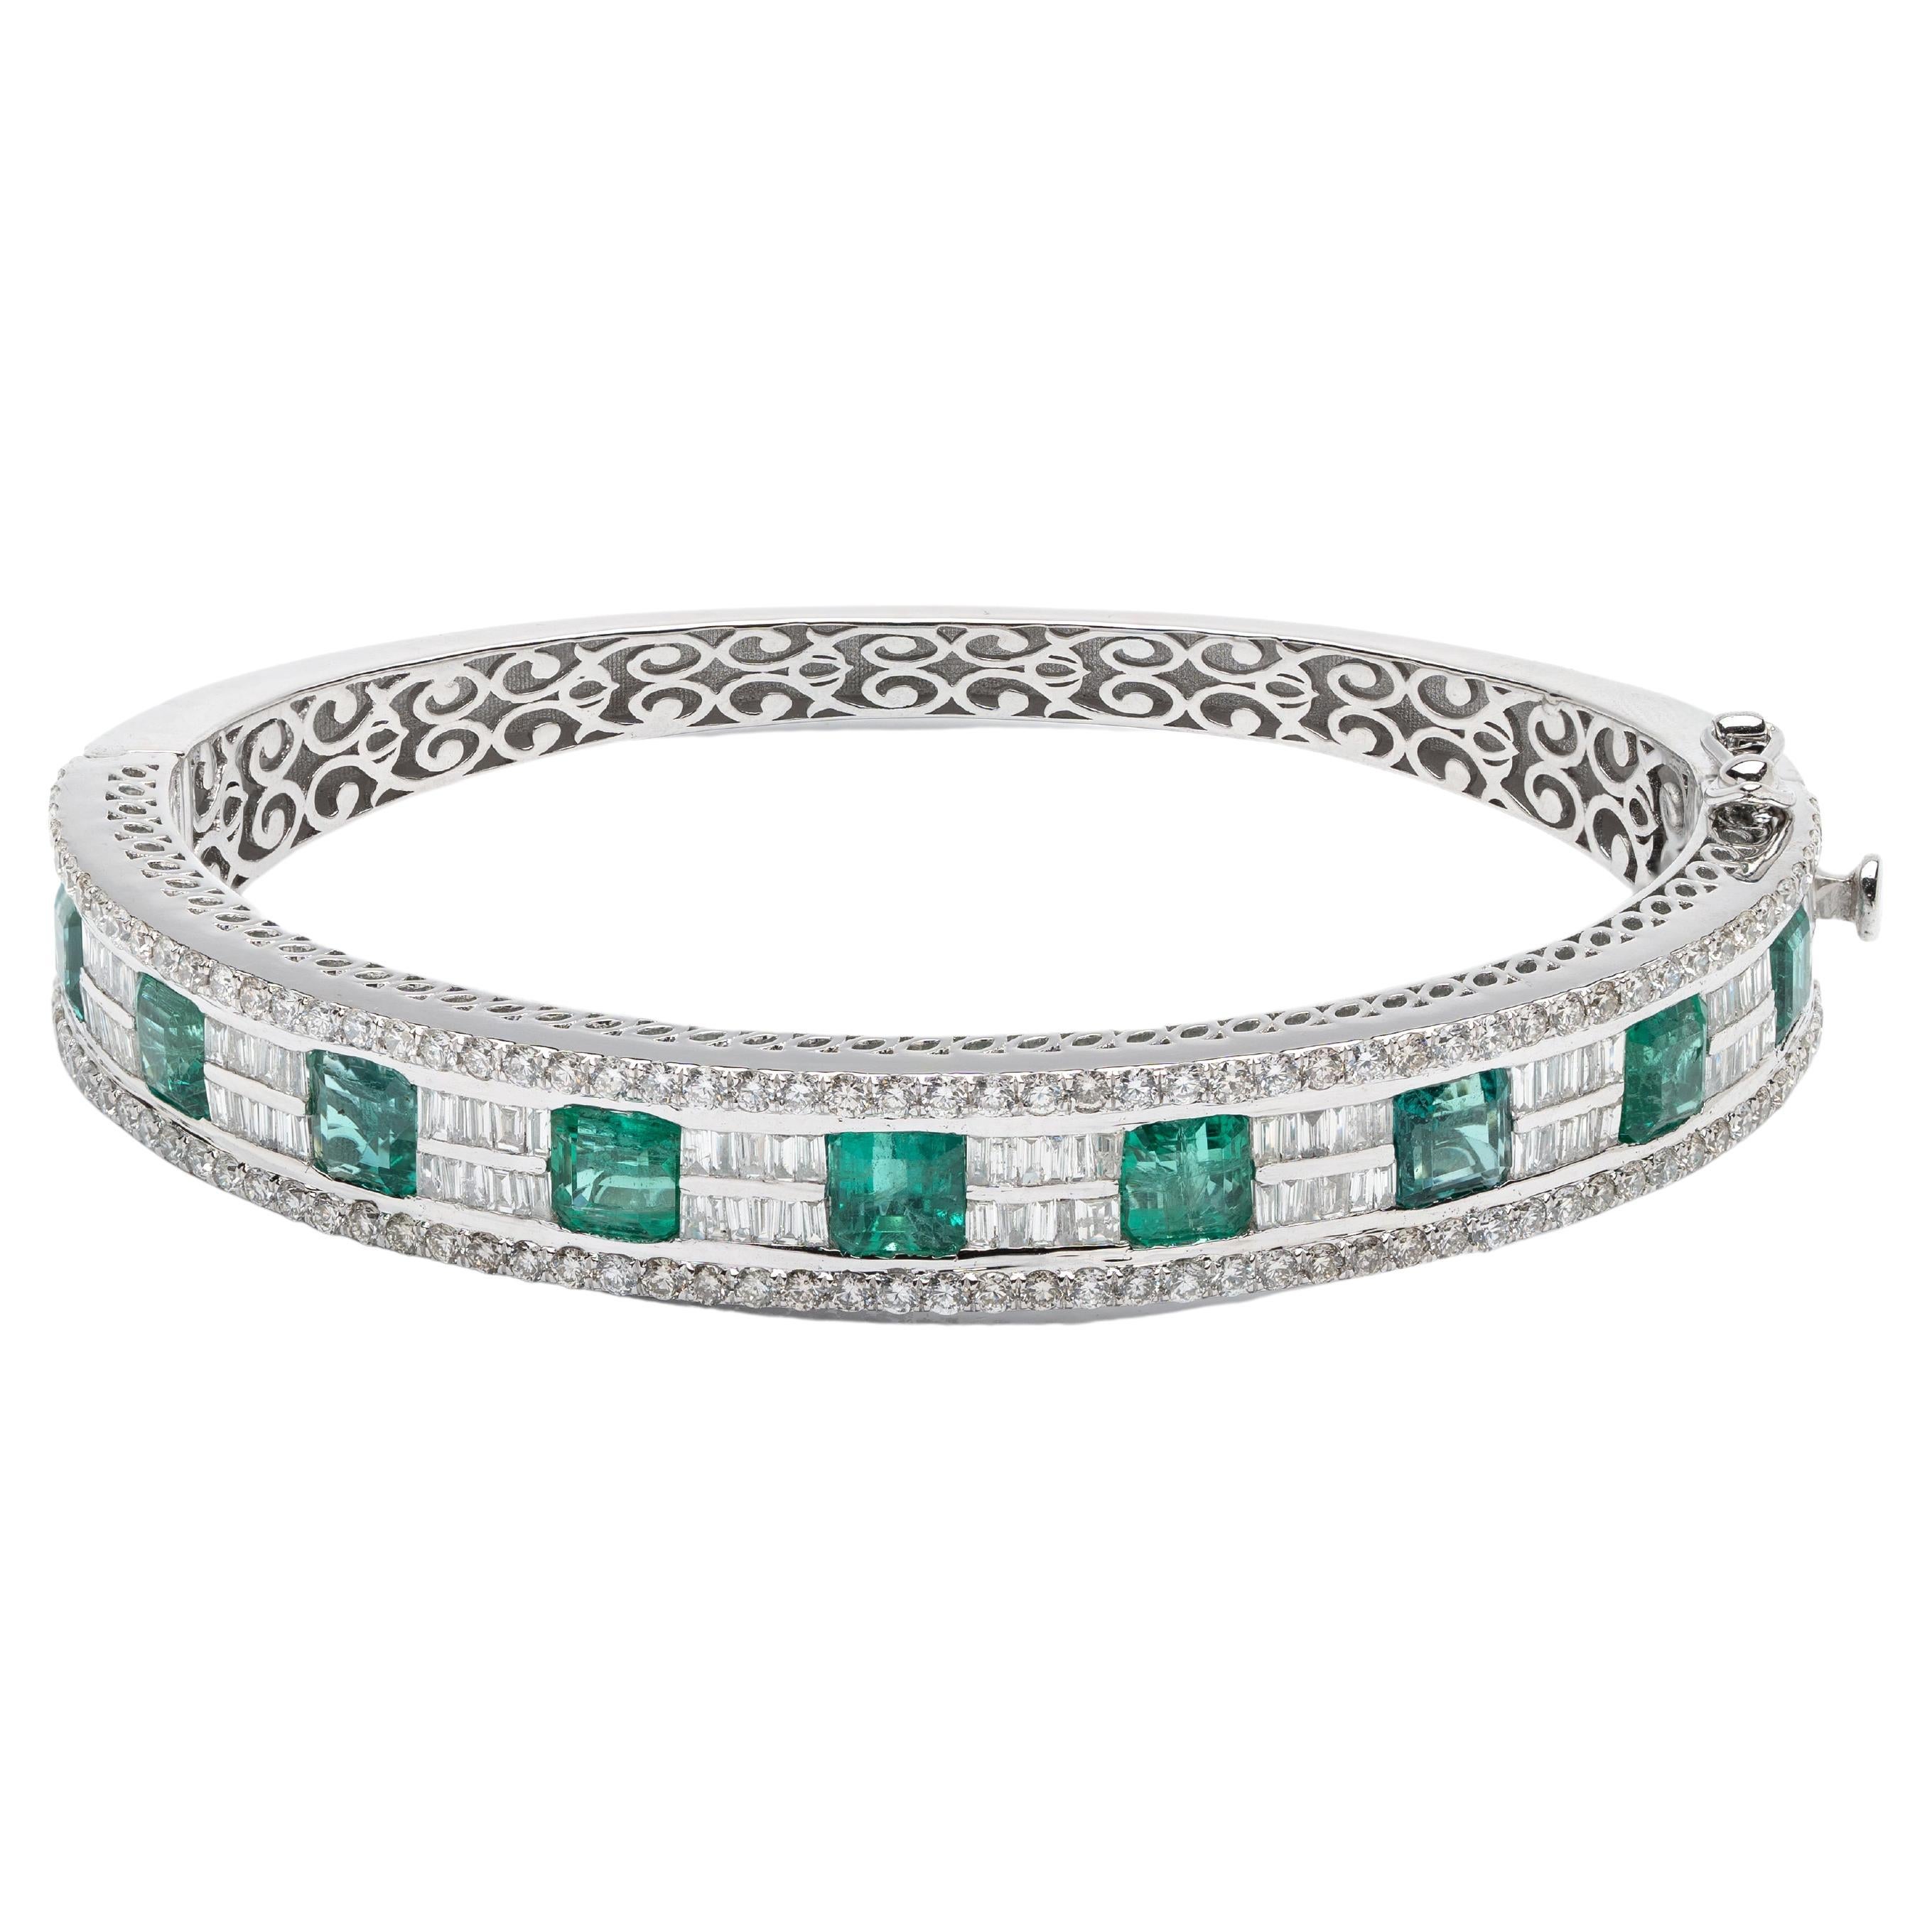 Natural Zambian Emerald Bracelet with 6.18 Carats Emerald and 3.05 Carats For Sale